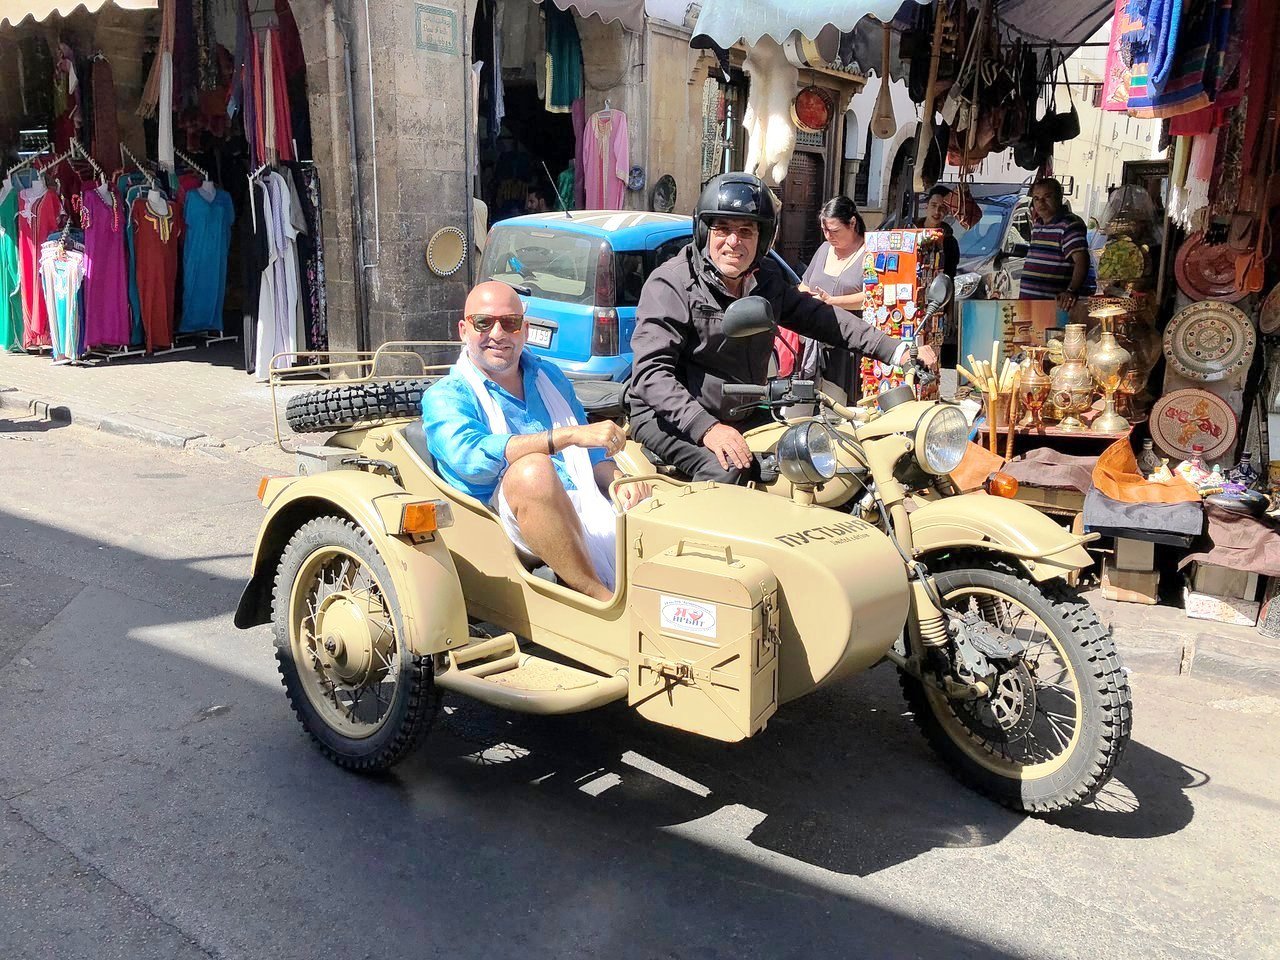 Morocco sidecar guided tour in Marrakech to explore Marrakesh and its medina